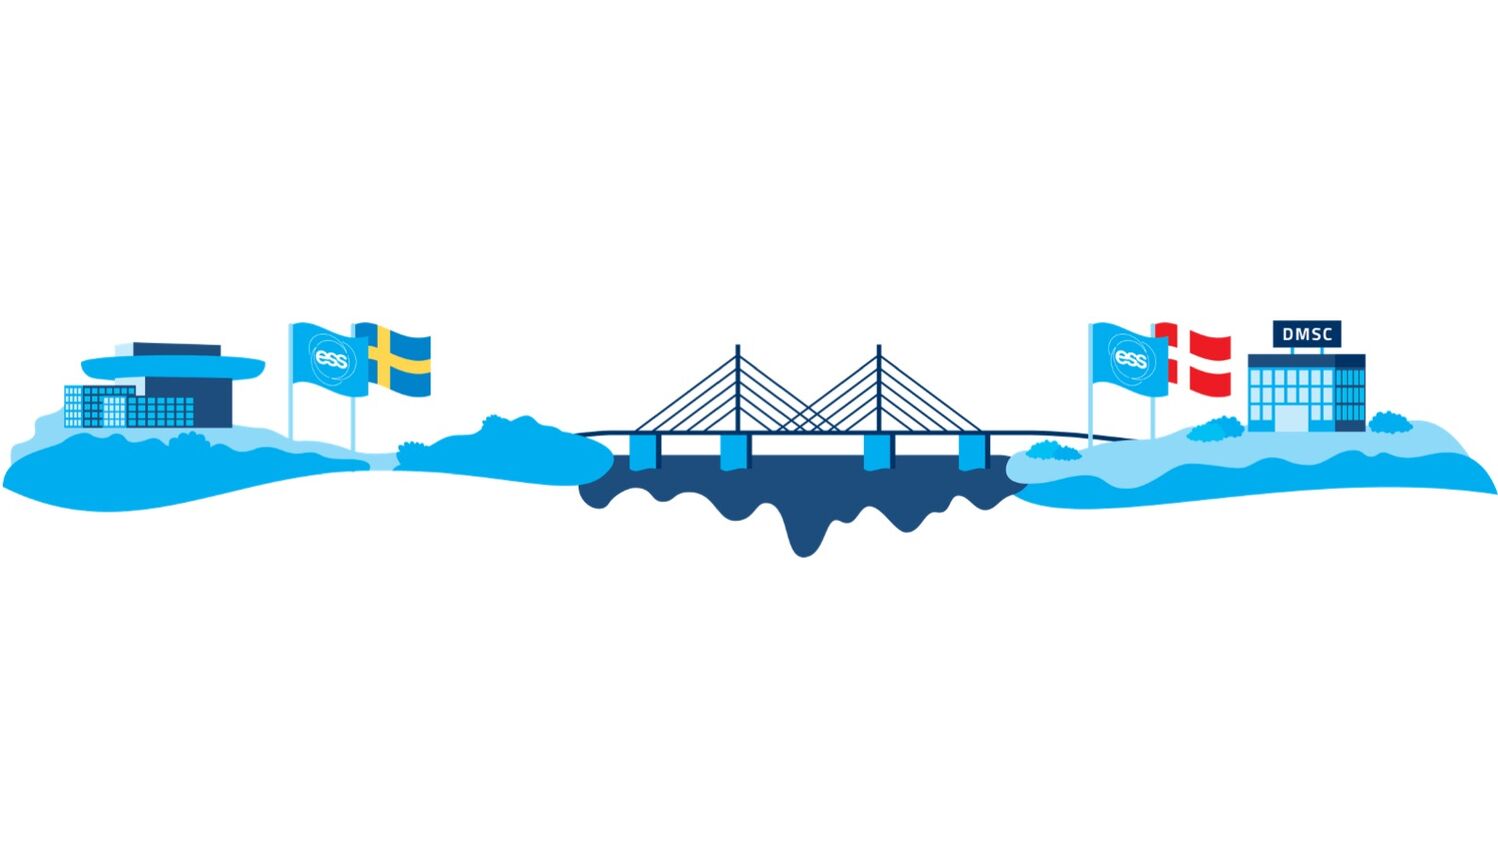 Graphic showing ESS in Sweden on the left and ESS DMSC in Denmark on the right, connected by the Oresund bridge